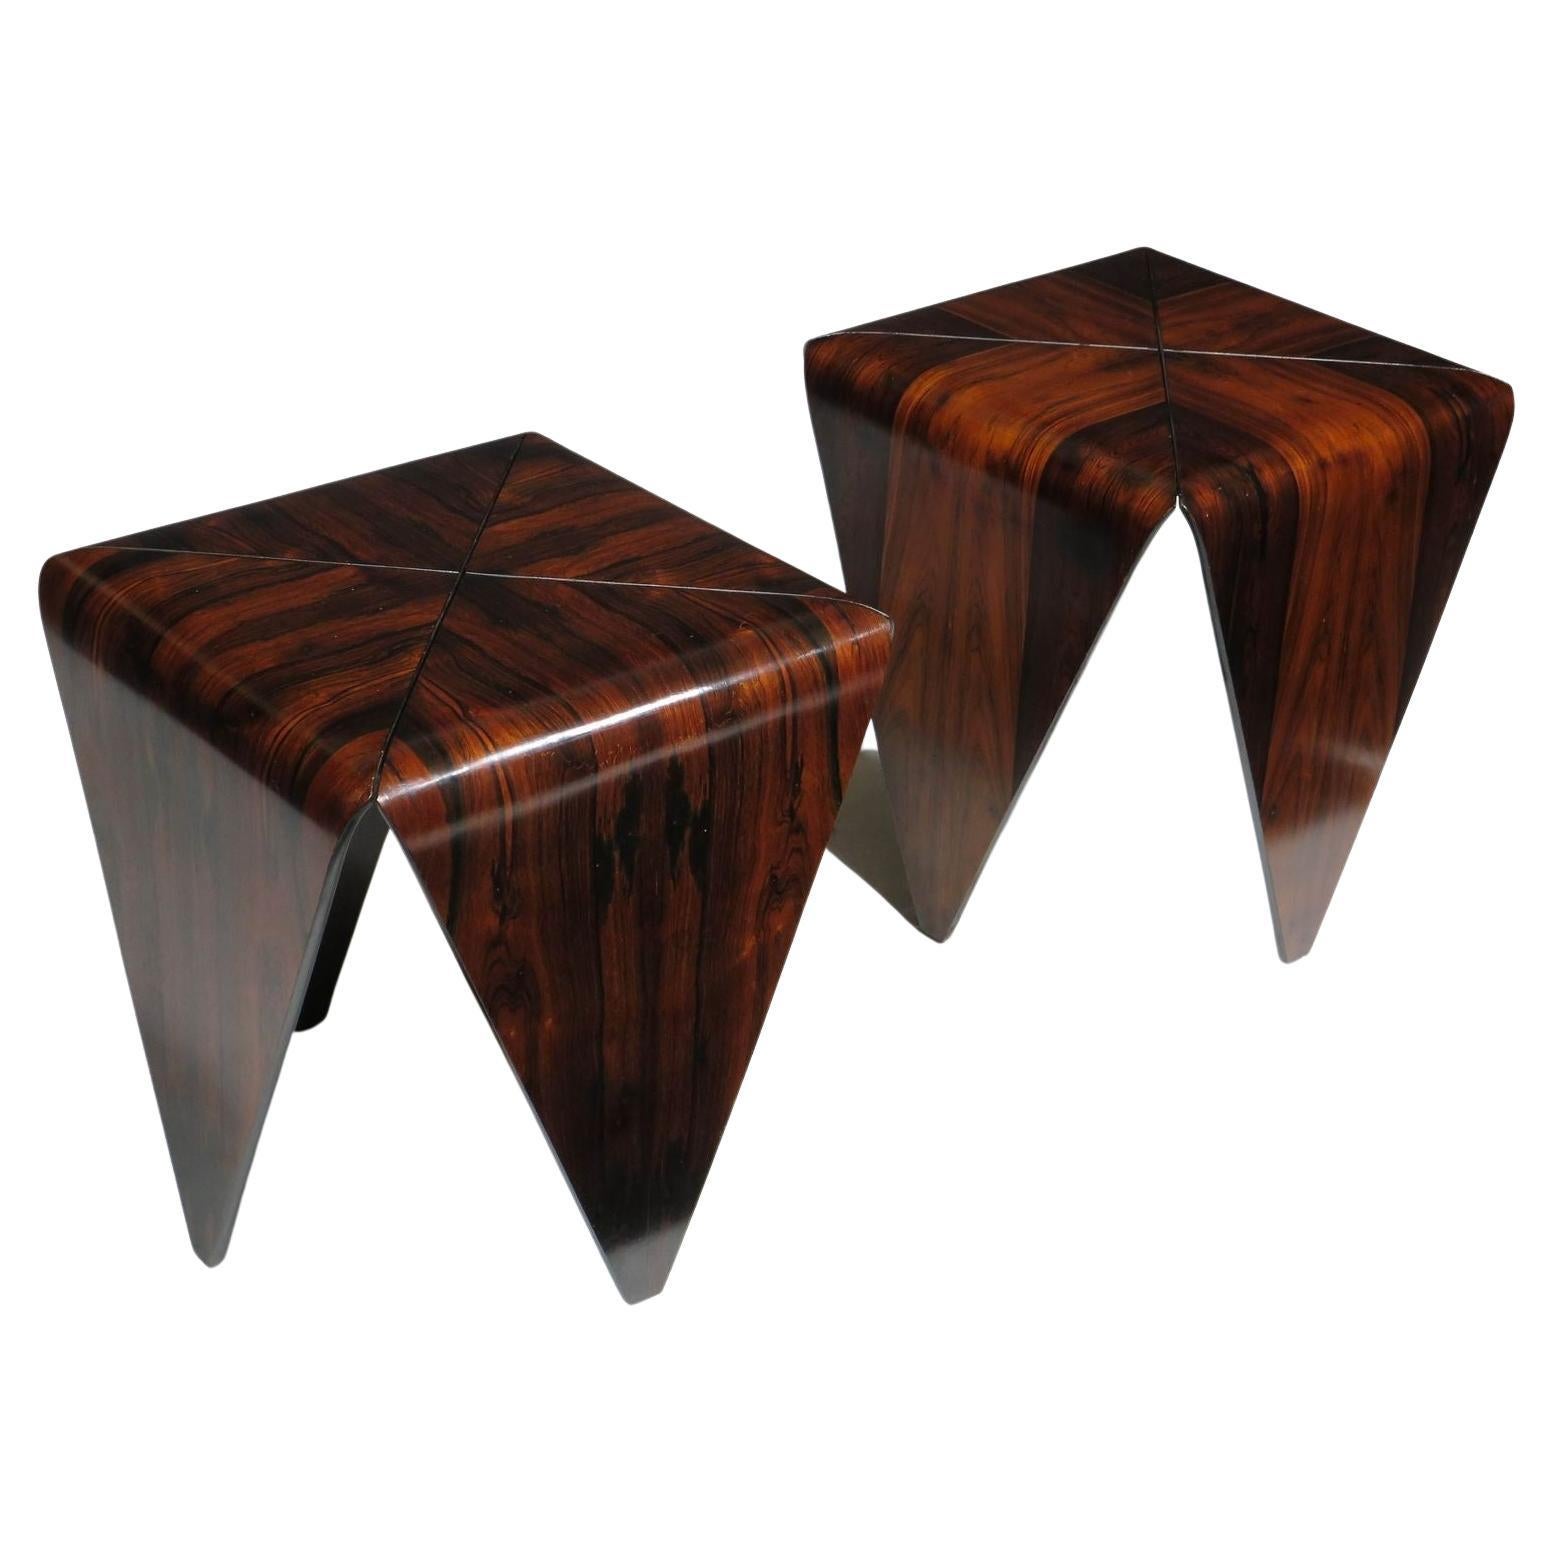 Pair of mid century rosewood side tables designed by Jorge Zalszupin manufactured by L' Atelier, Sao Paulo Brazil. The tables are uniquely crafted of steamed rosewood in an origami shape of four folded petals with richly figured rosewood grain,